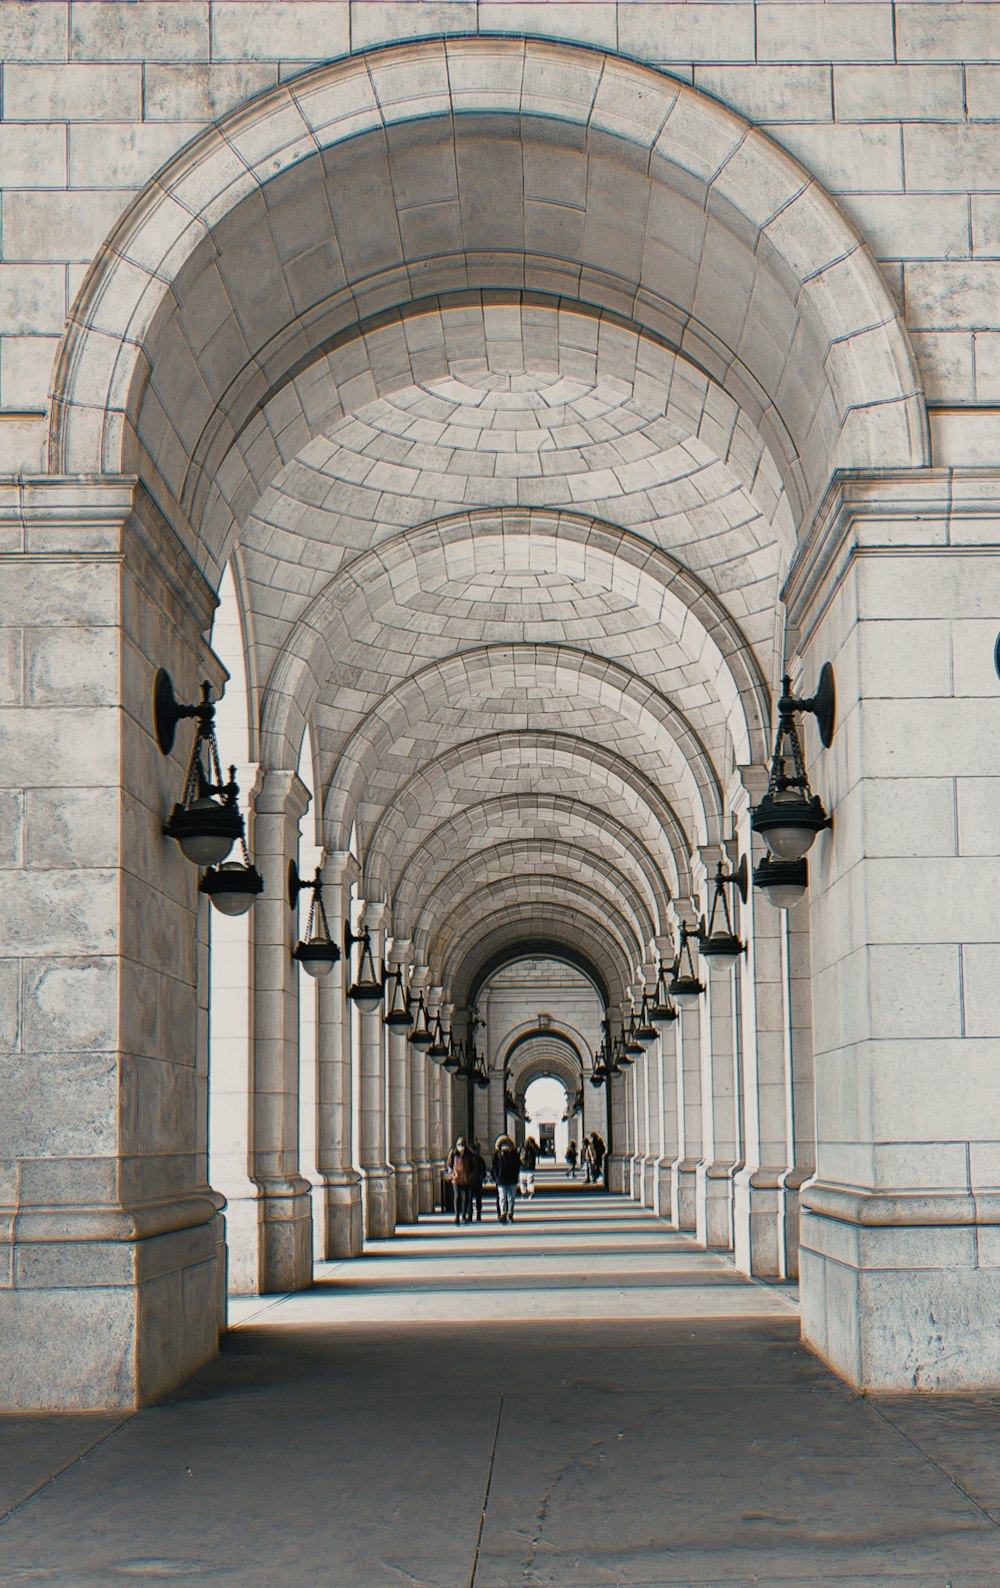 a walkway lined with stone arches and street lamps